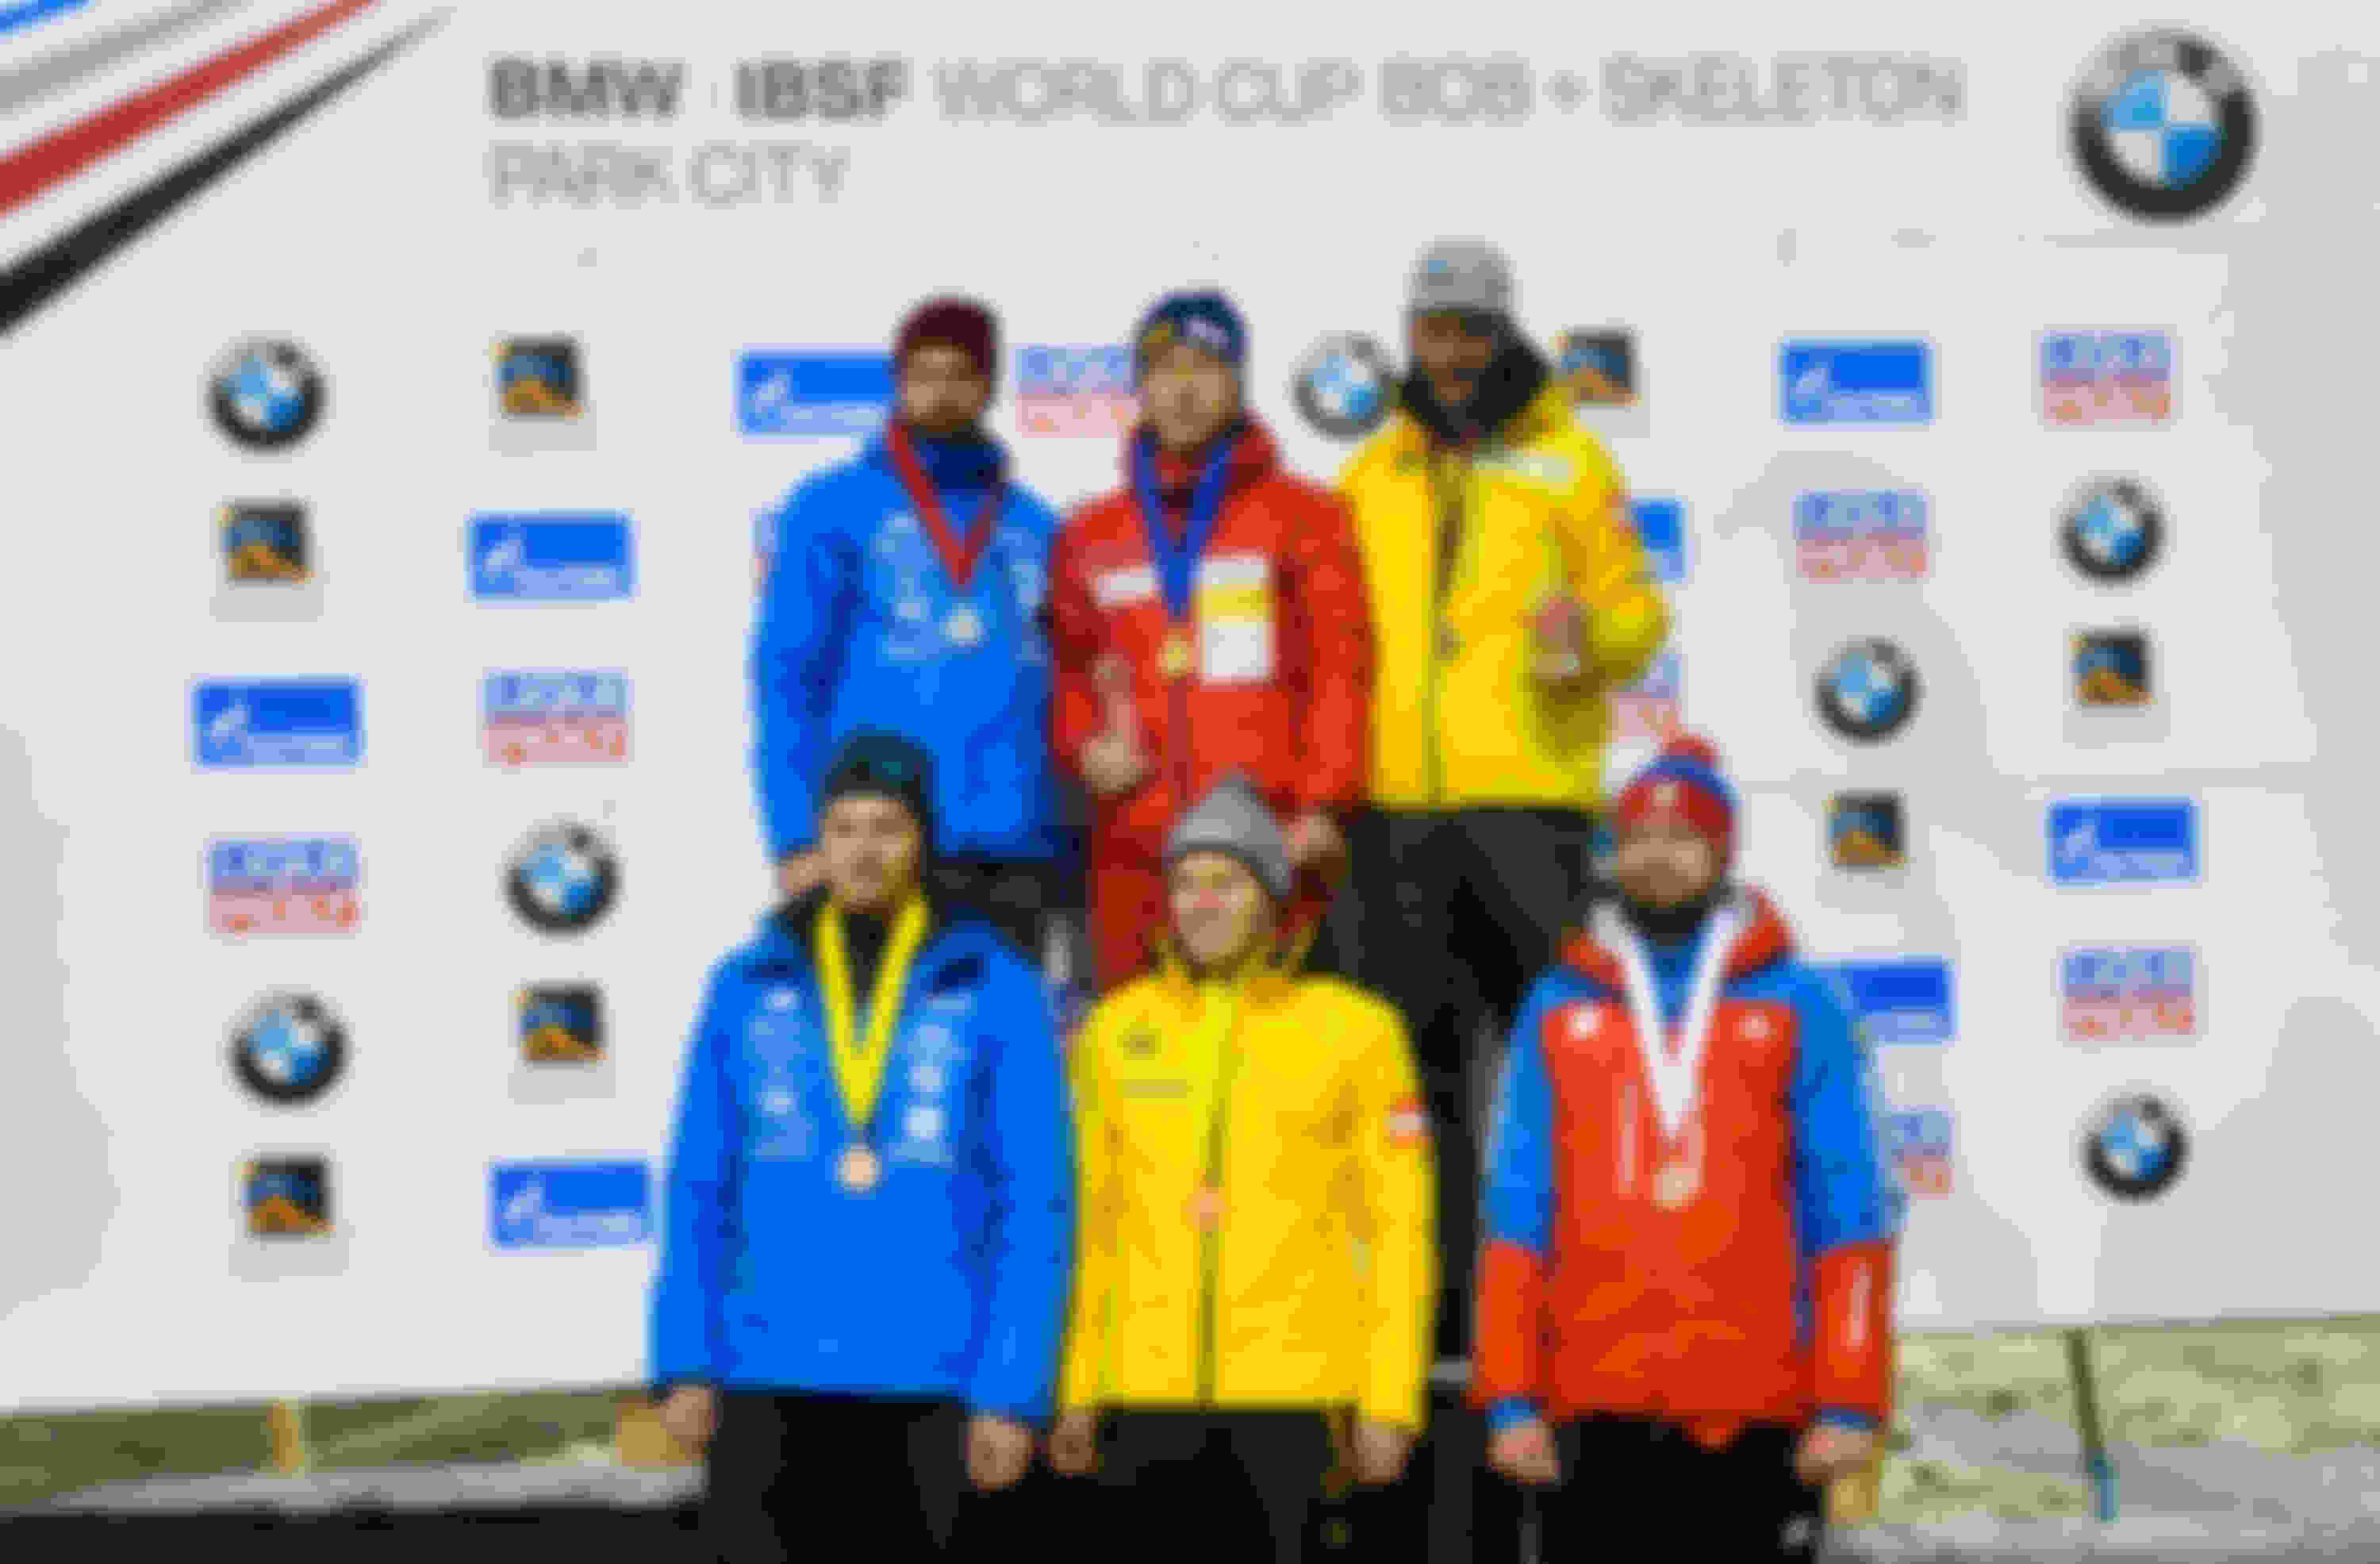 (Back row L-R) Martins Dukurs, Yun Sung-bin, Axel Jungk, and (front row L-R) Tomass Dukurs, Christopher Grotheer and Alexander Tretiakov after the 2017 Skeleton World Cup in Park City, Utah